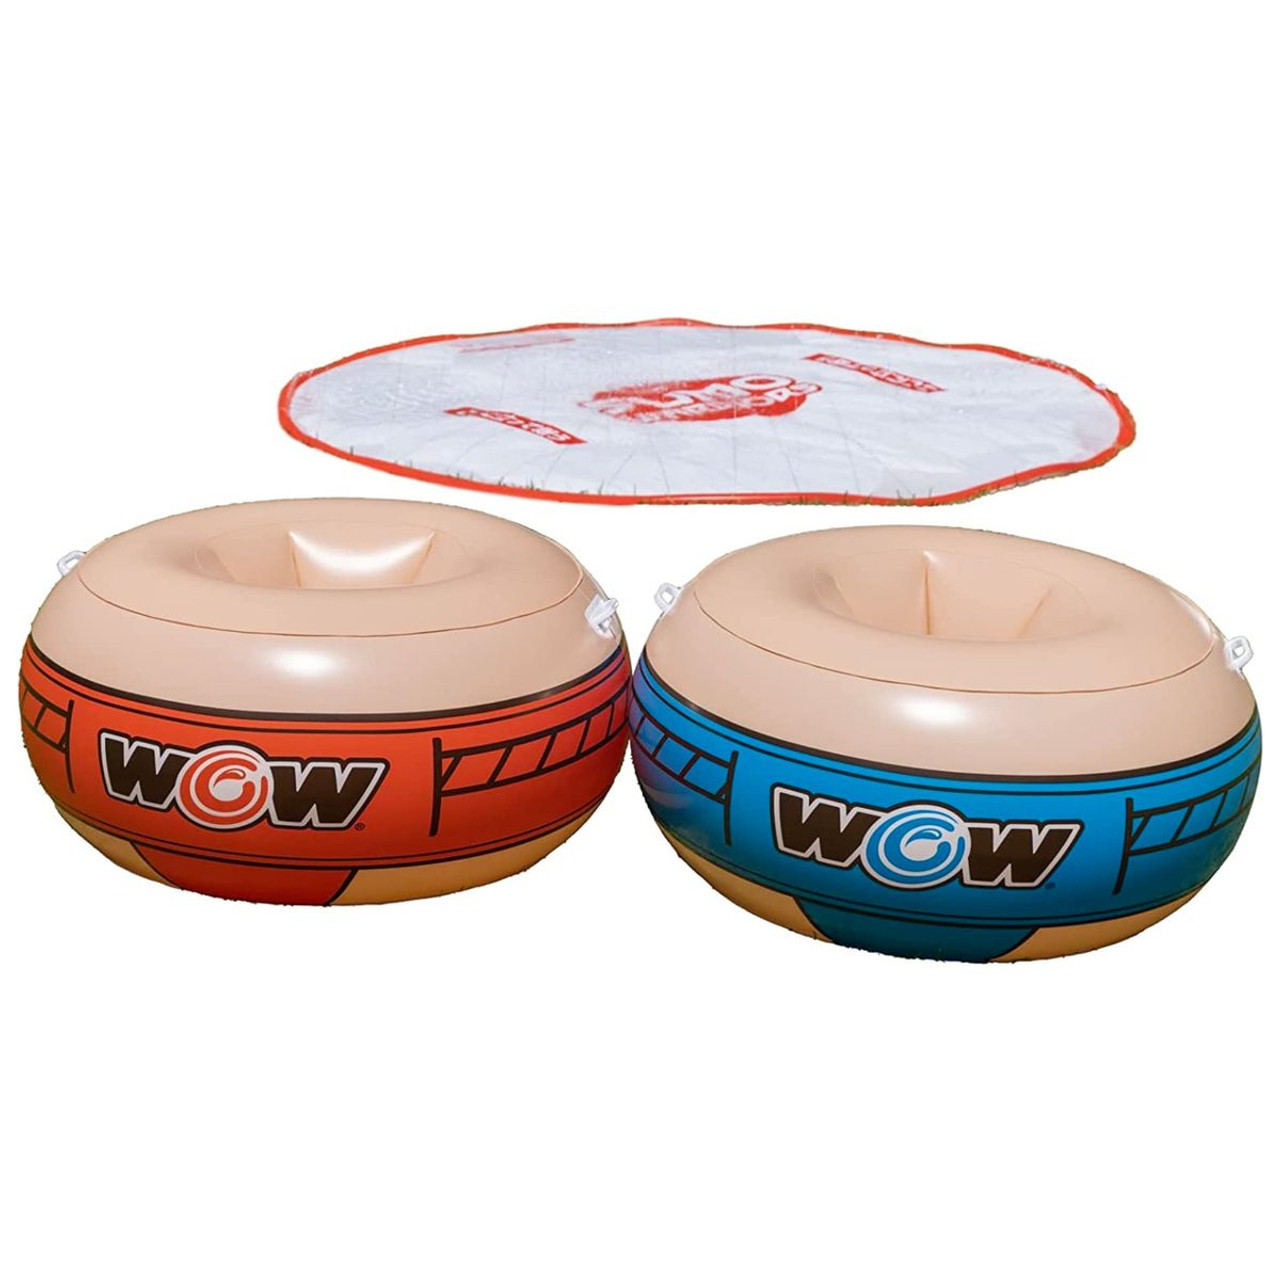 WOW Watersports 10ft Sumo Wrestling Spray Pad with 2 Sumo Belly-Bumpers product image